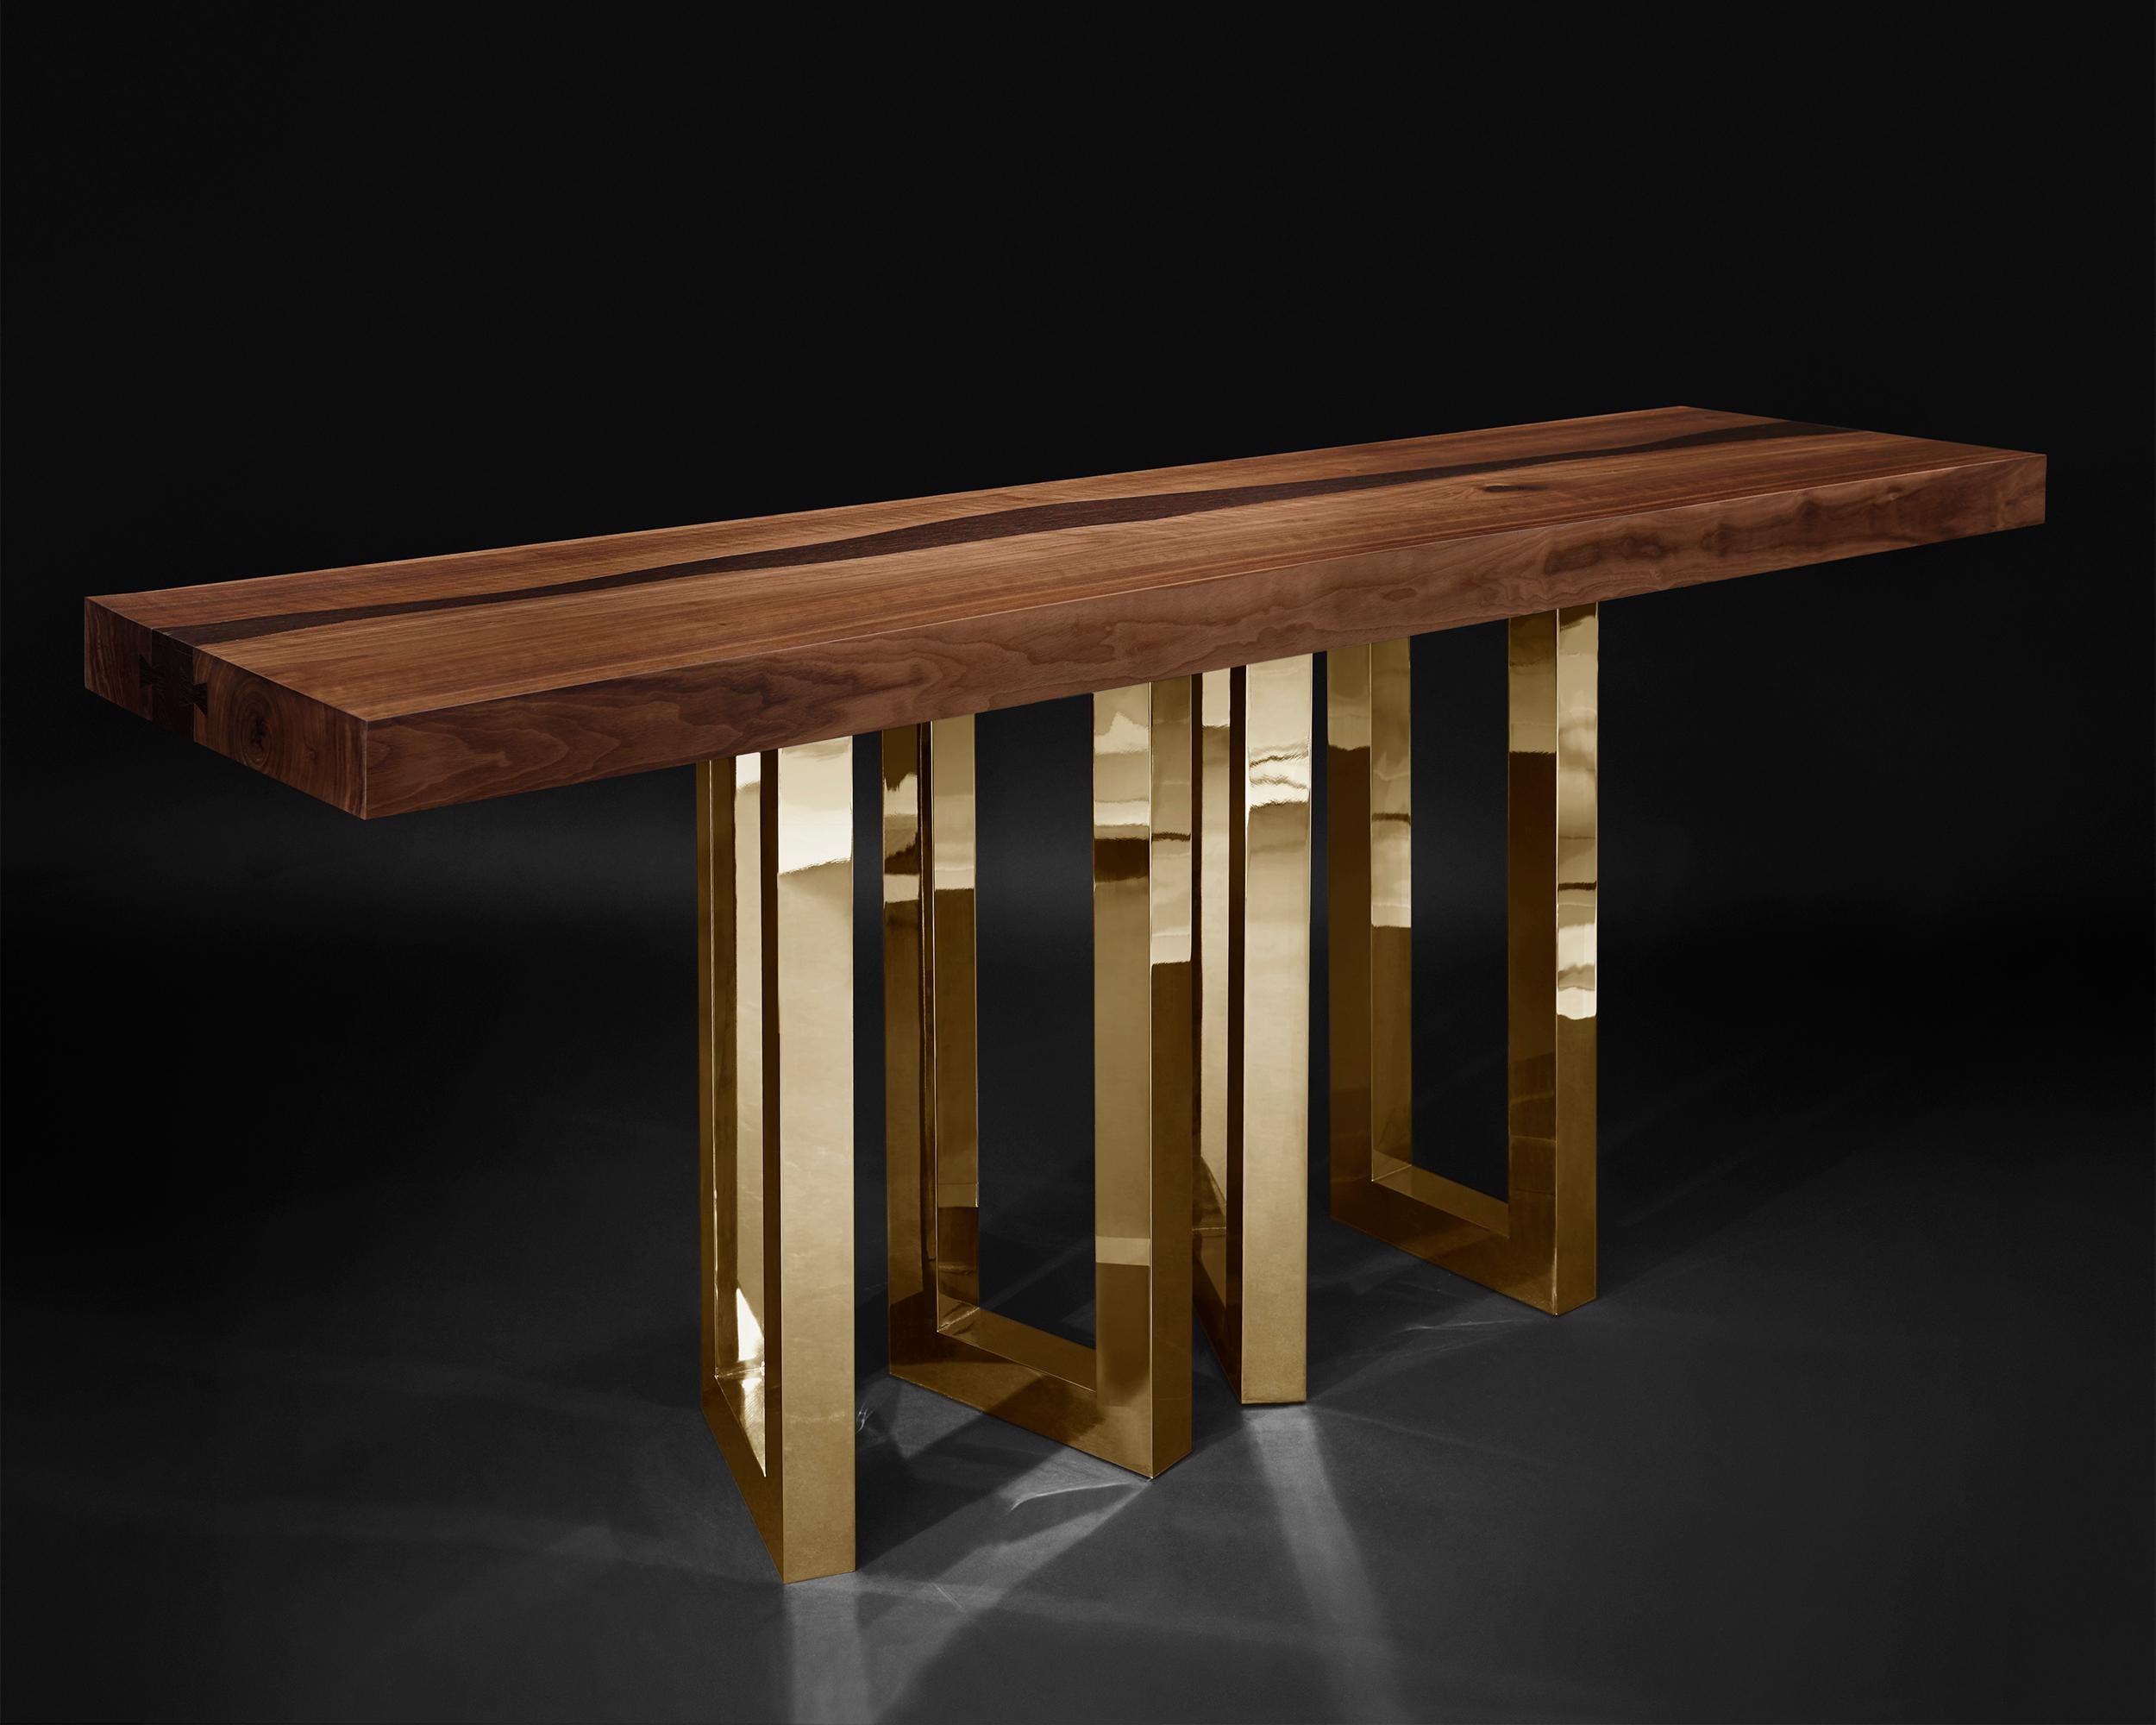 A solid block of walnut held up by what seems to be a casually arranged group of glittering legs. A composite of contrasting elements, massive and sophisticated, strong and passionate; Il Pezzo 6 Console is a harmonious and timeless whole.
The